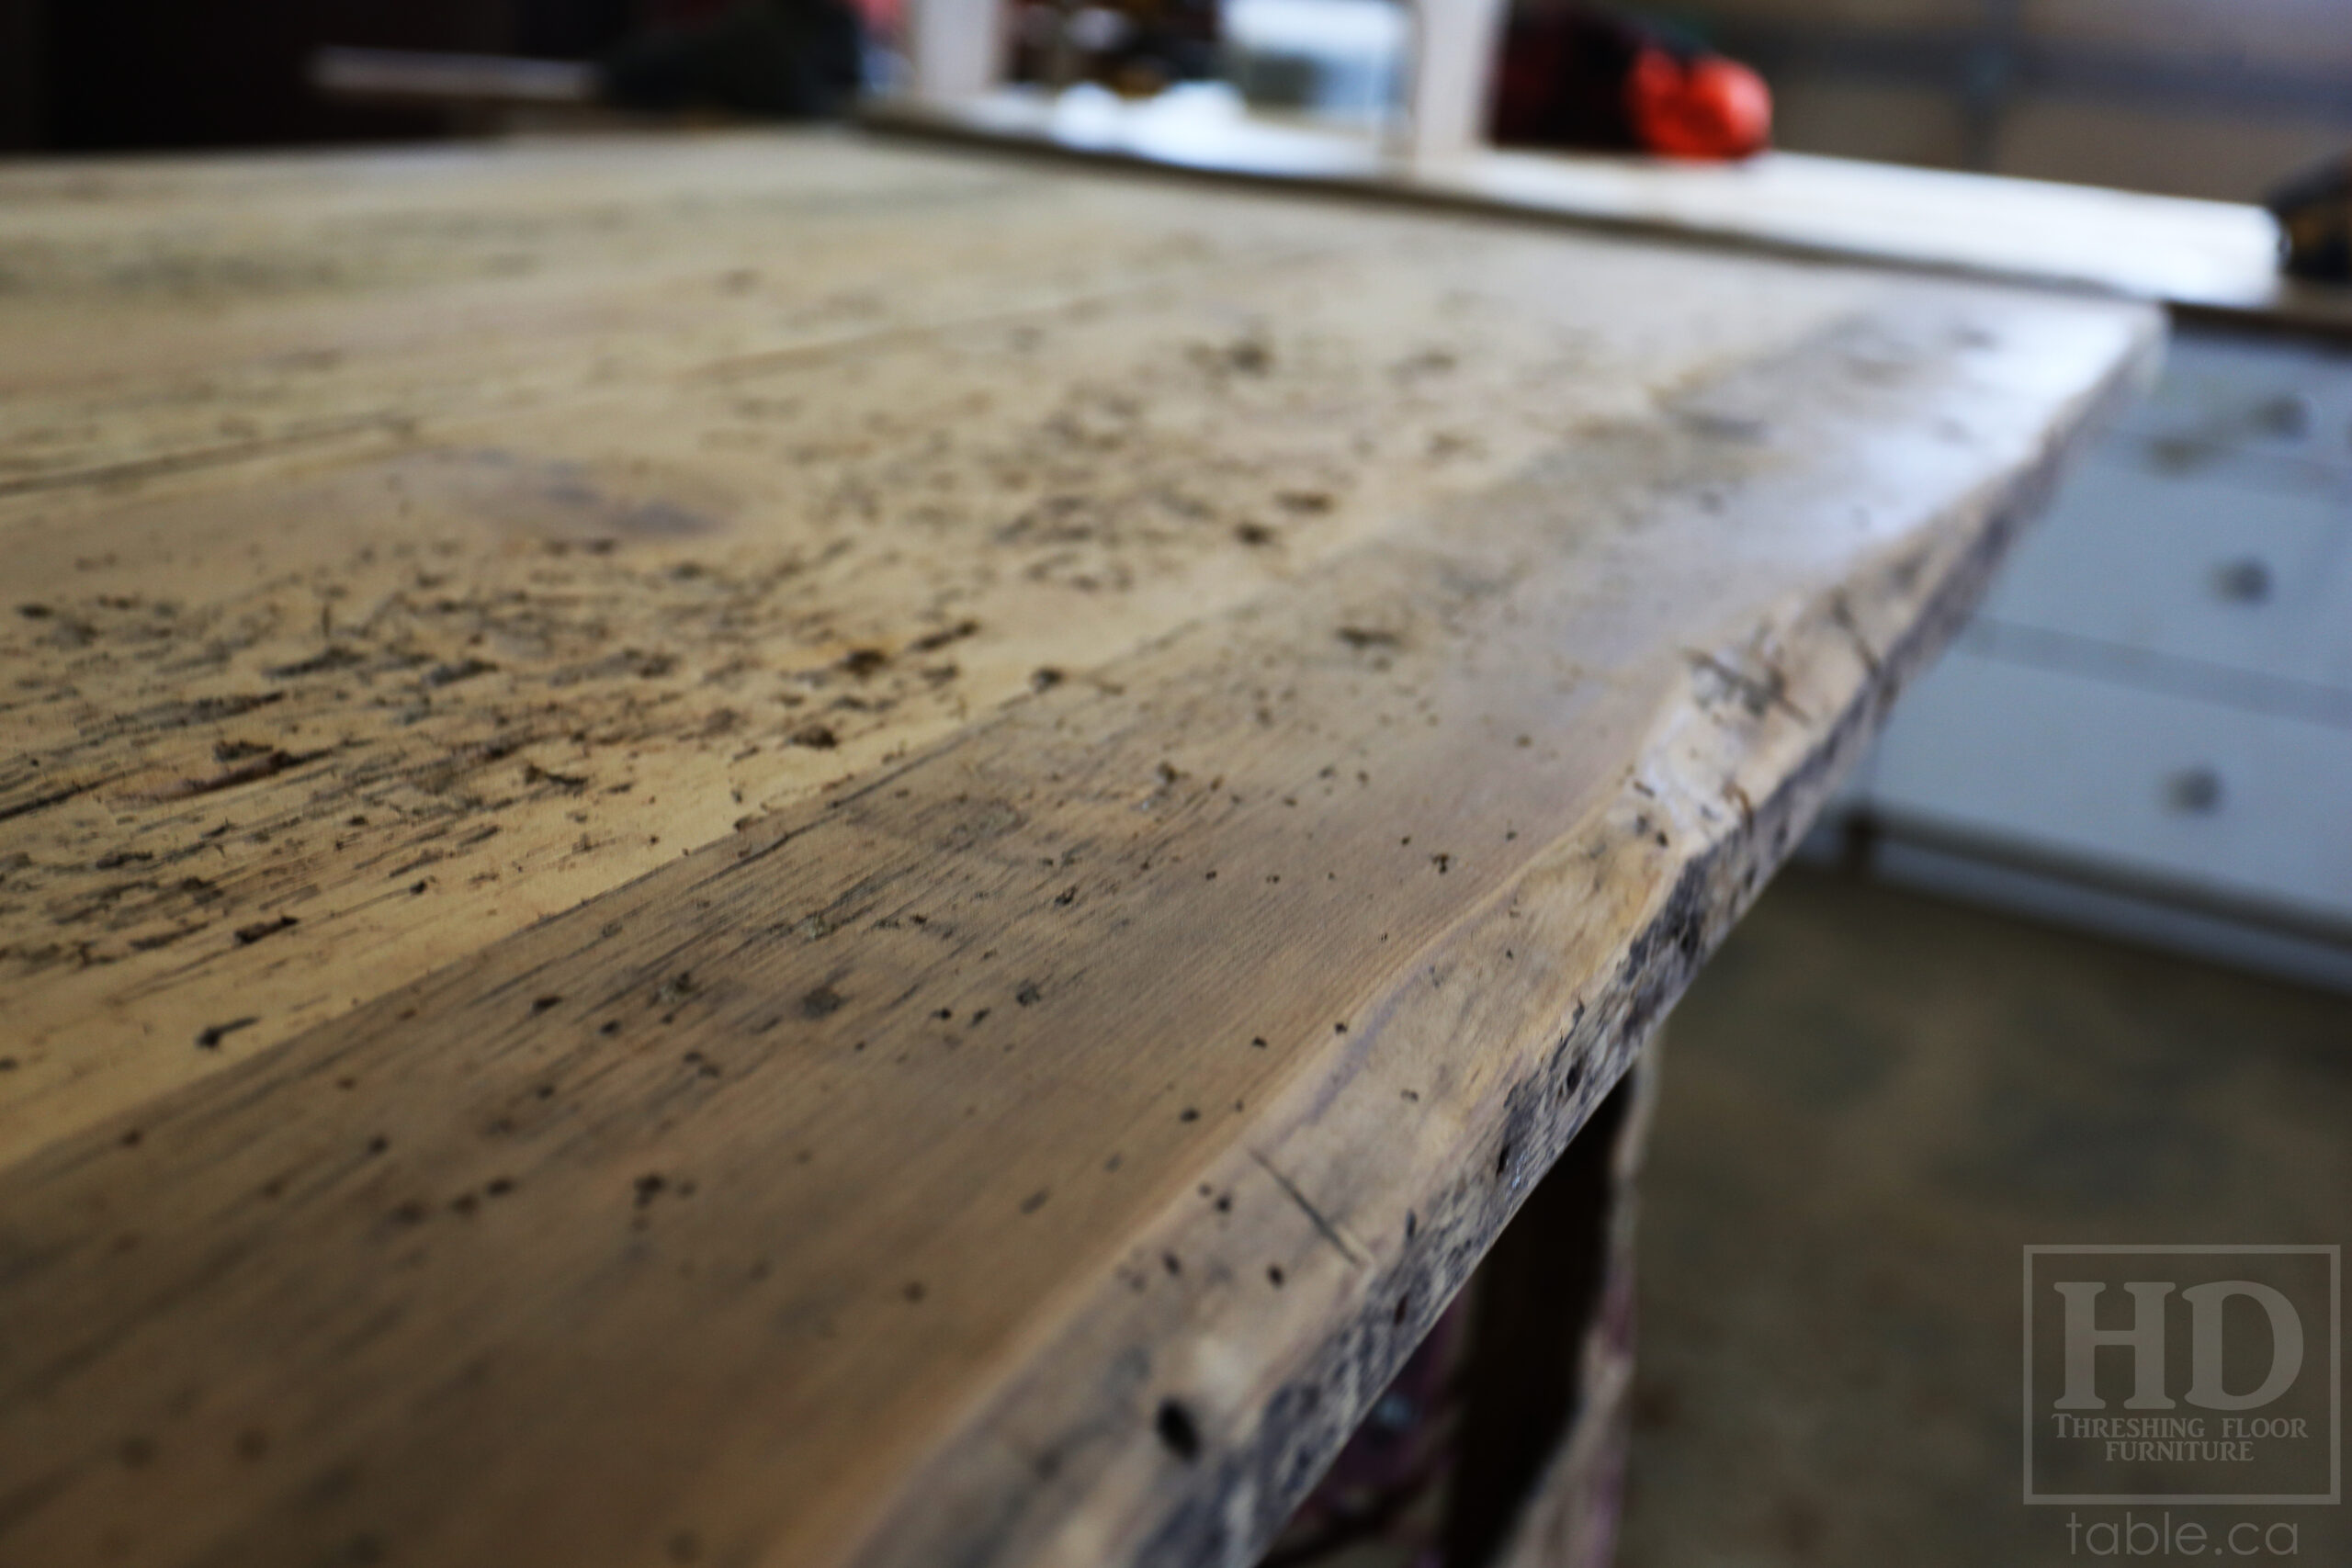 8' Ontario Barnwood Wood Table we made for an Oakville, Ontario home - 39" wide â€“ Modern Plank Base â€“ Reclaimed Old Growth Hemlock Threshing Floor Construction - Original edges & distressing maintained â€“ Satin polyurethane finish [no epoxy filling] â€“ www.table.ca